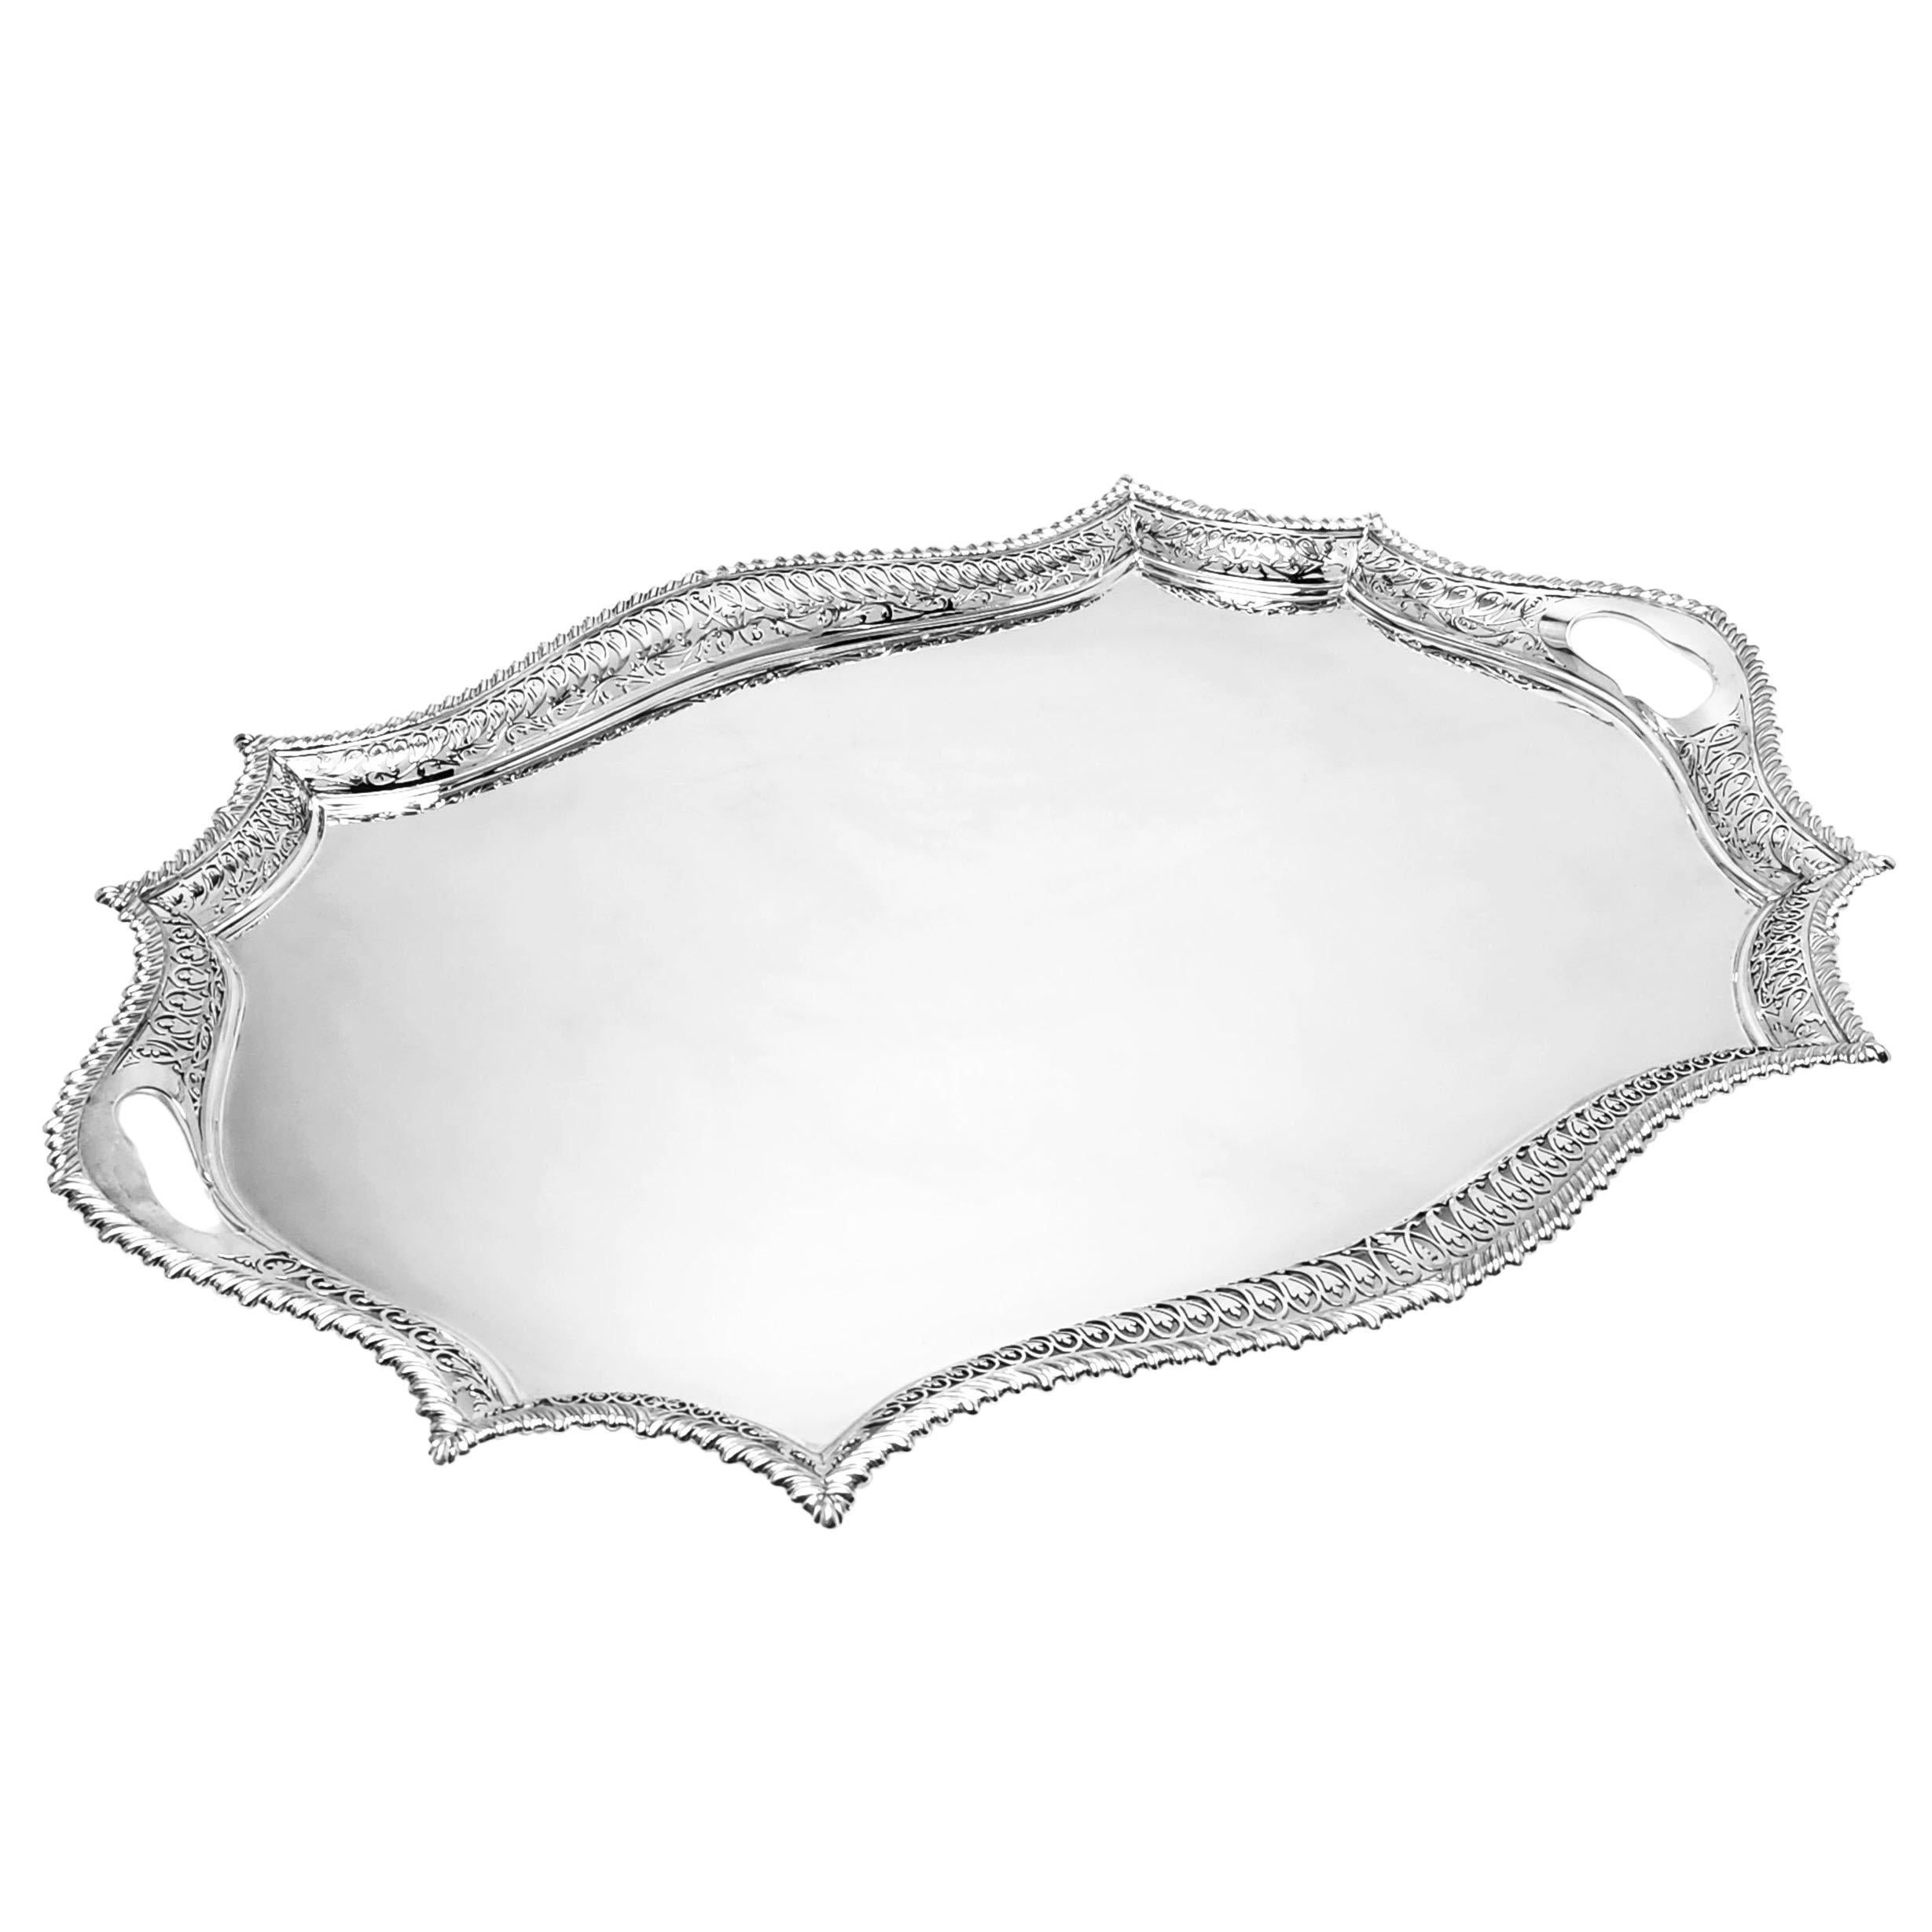 Antique Edwardian Sterling Silver Serving Tray Tea Tray 1906 For Sale